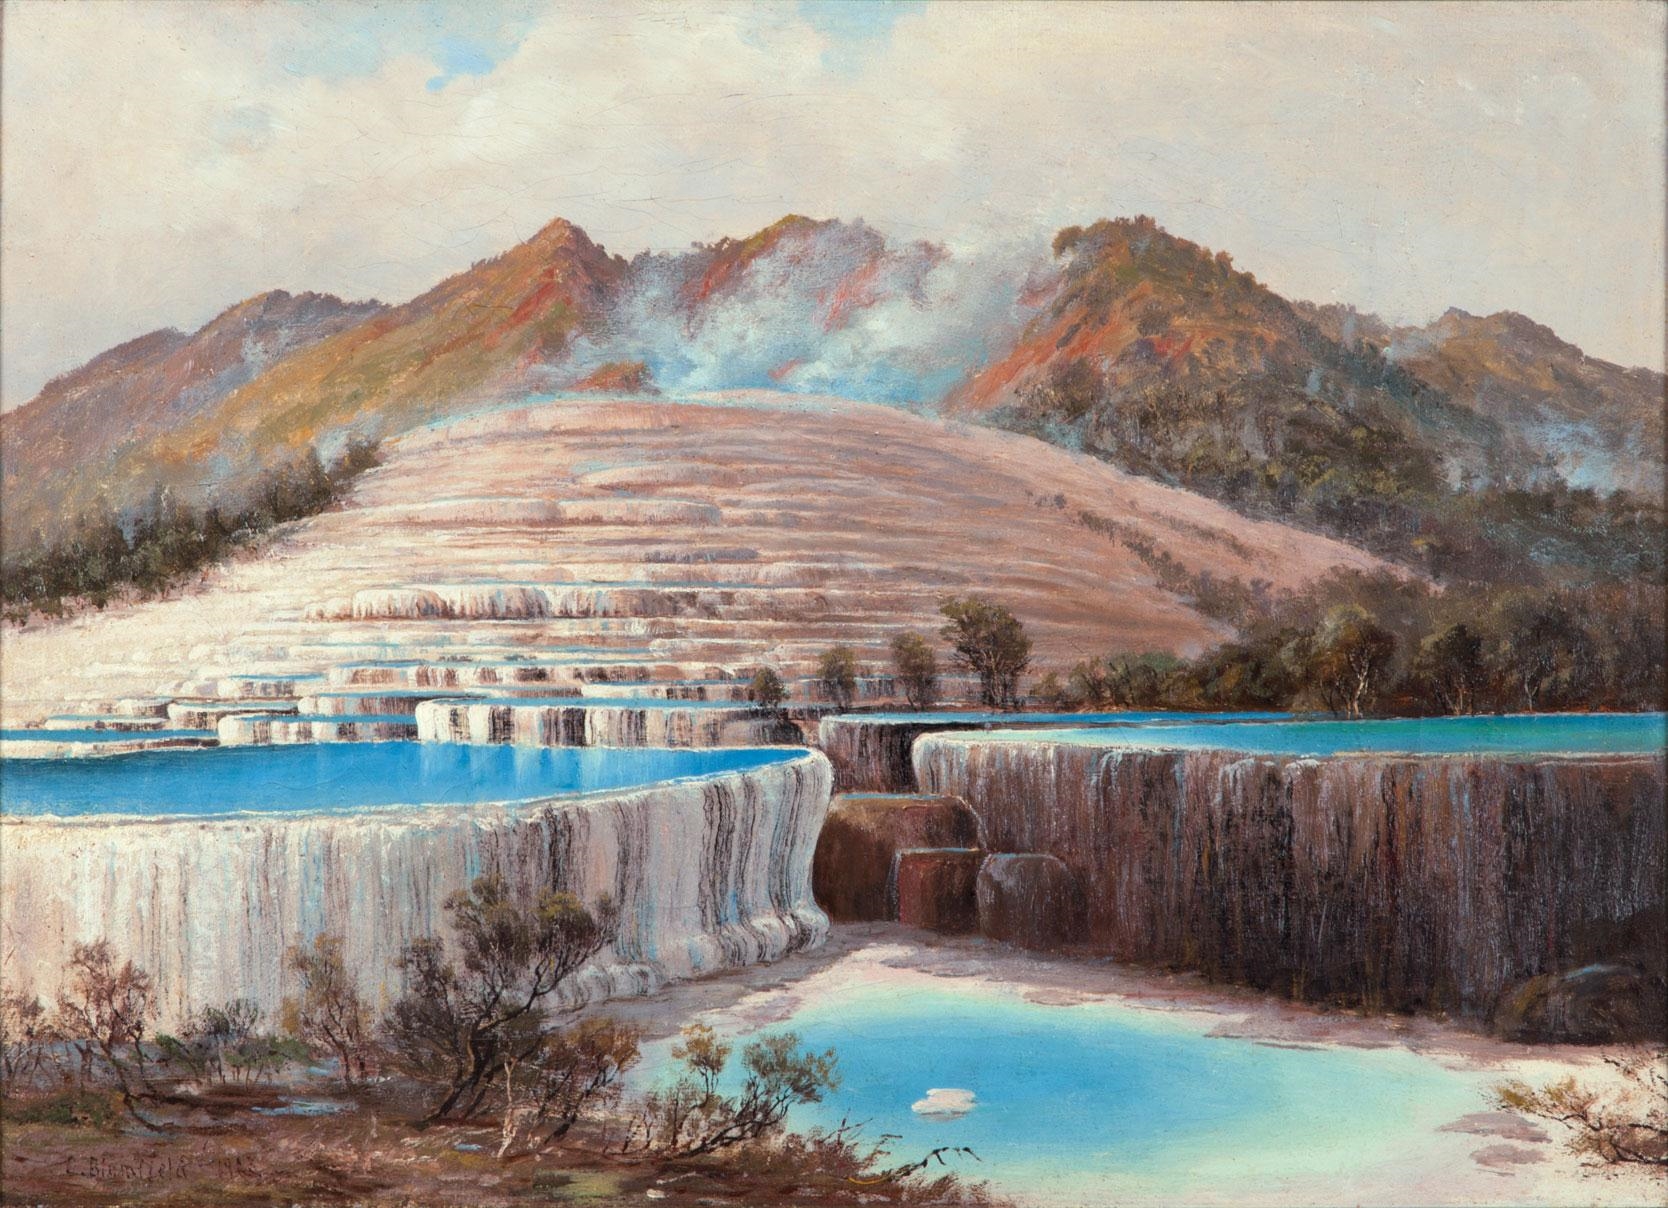 The Pink Terraces by Charles Blomfield, 1913